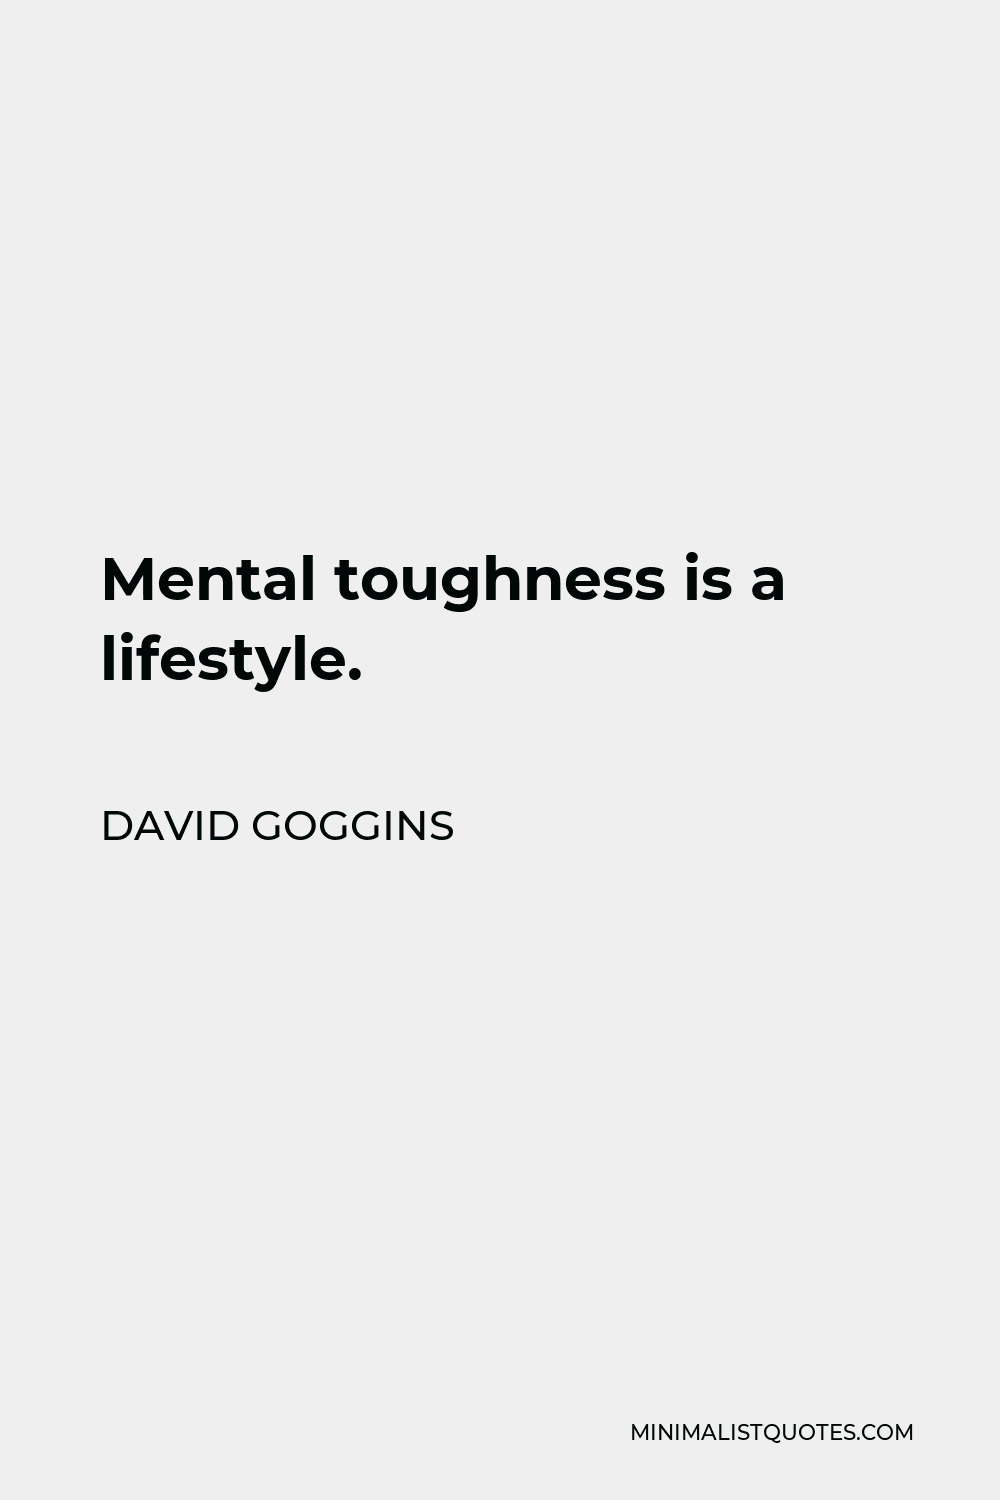 David Goggins Quote: Mental toughness is a lifestyle.